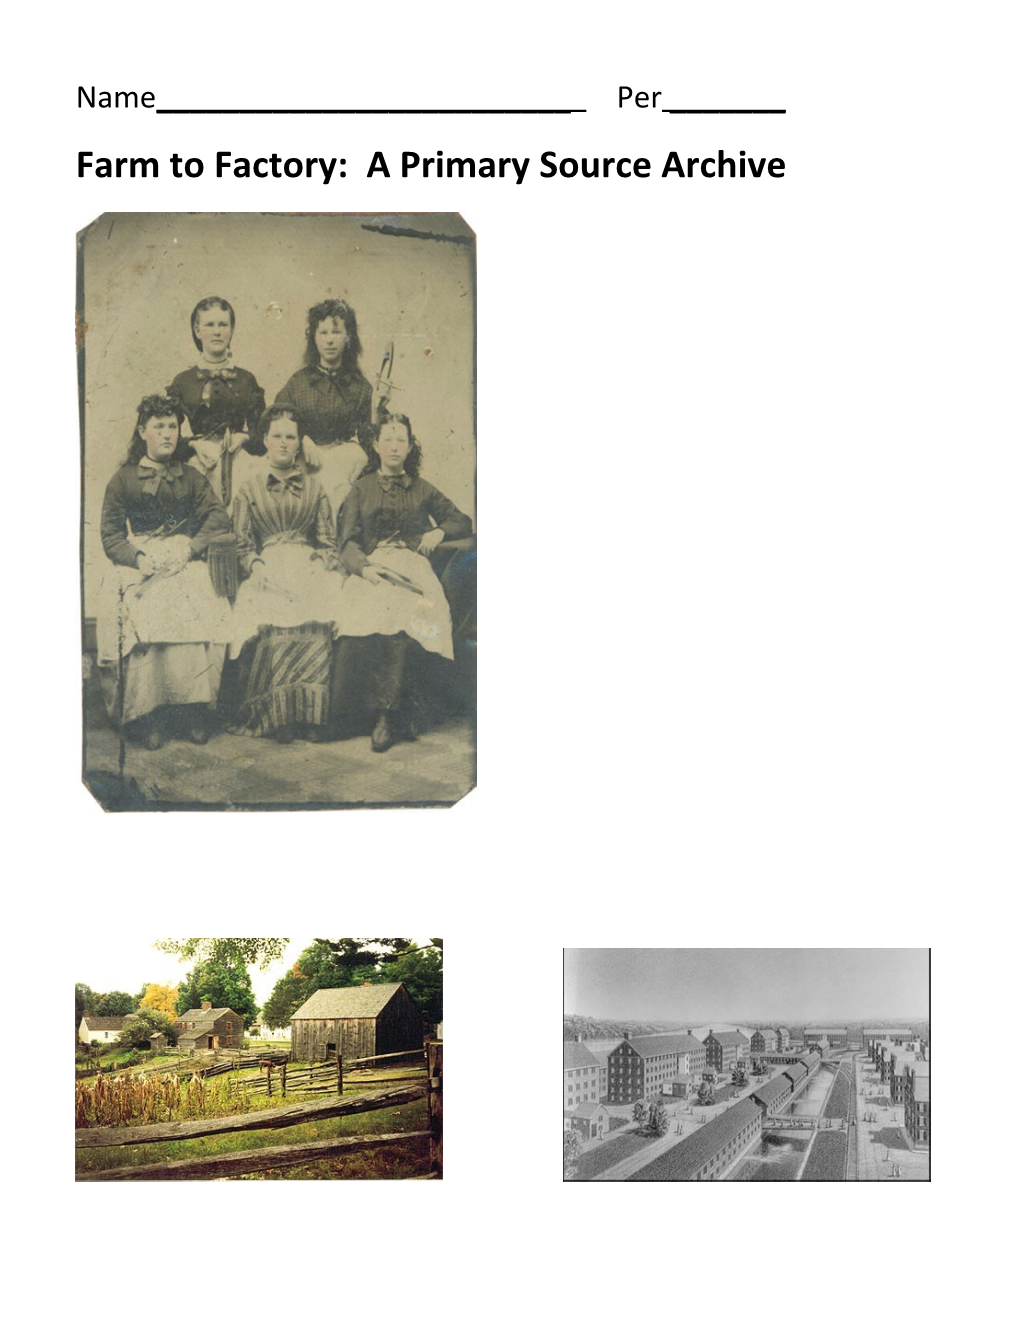 Farm to Factory: a Primary Source Archive